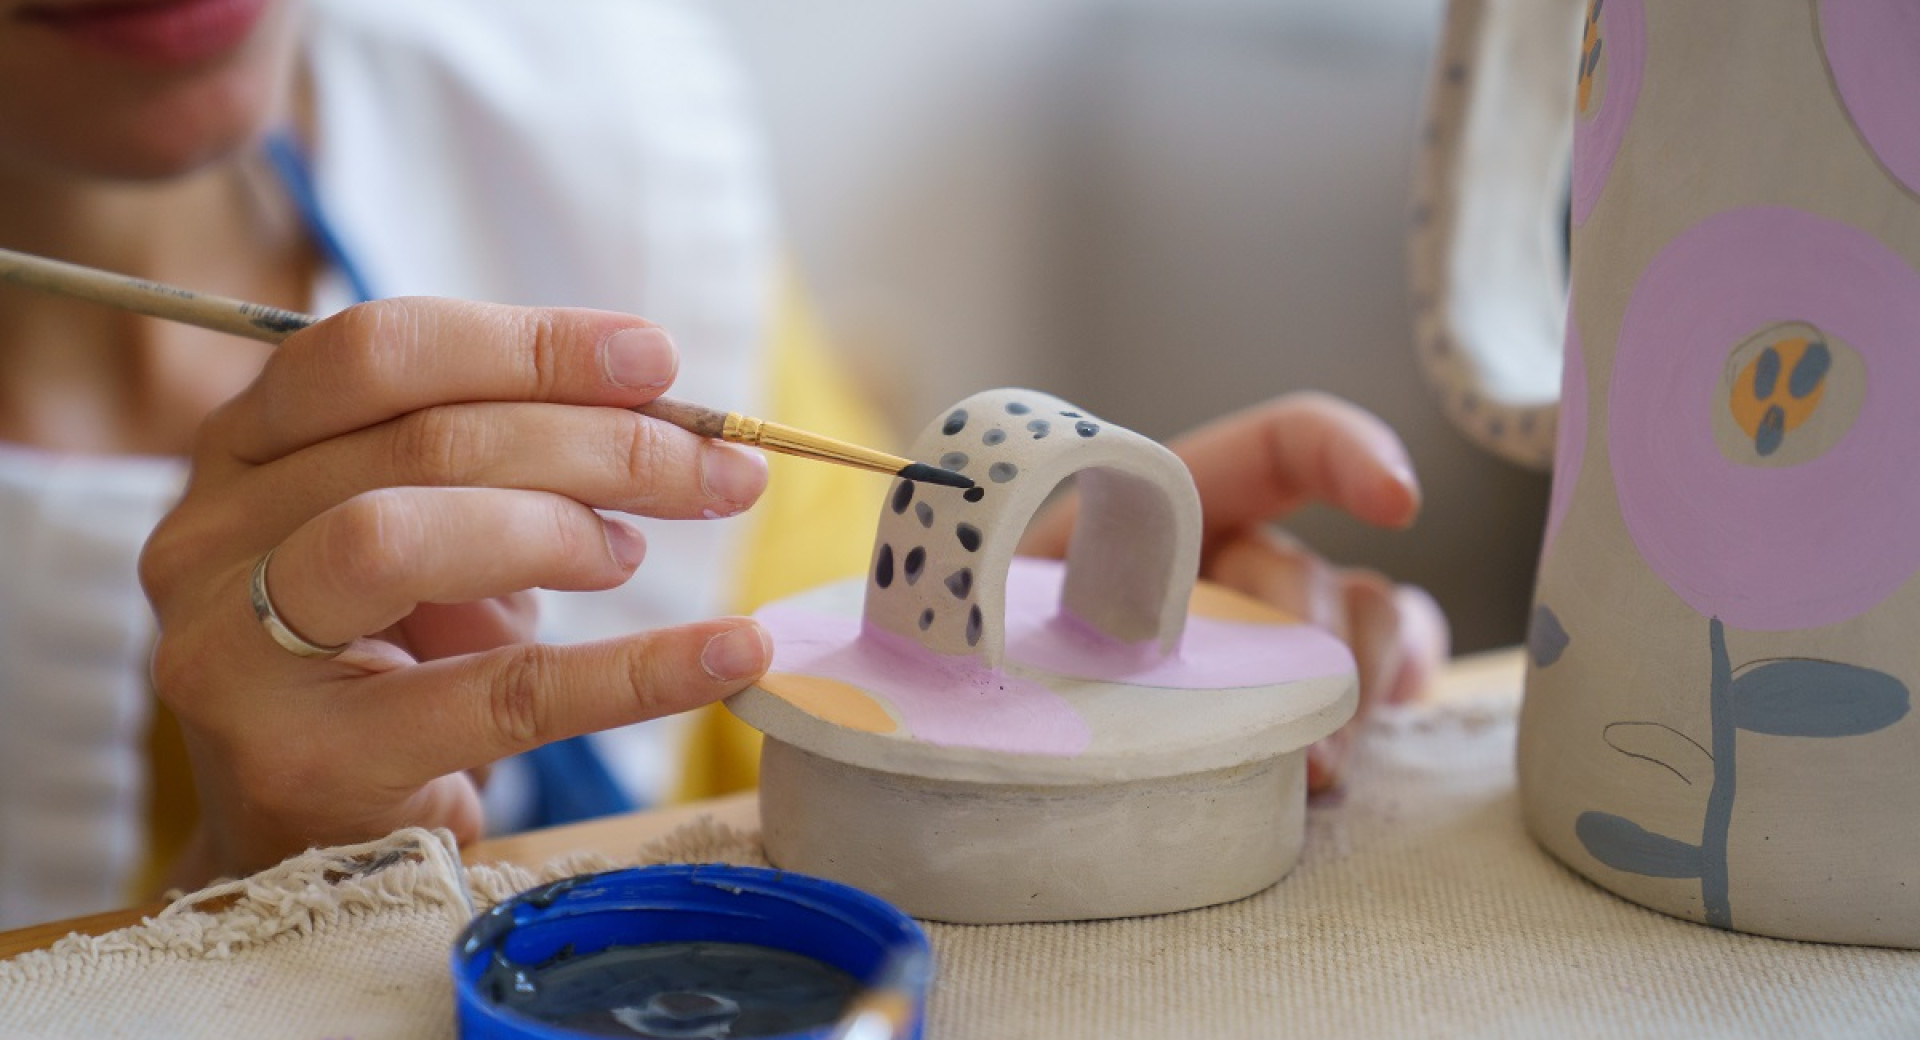 A woman using a brush to paint dark spots on a white clay art.